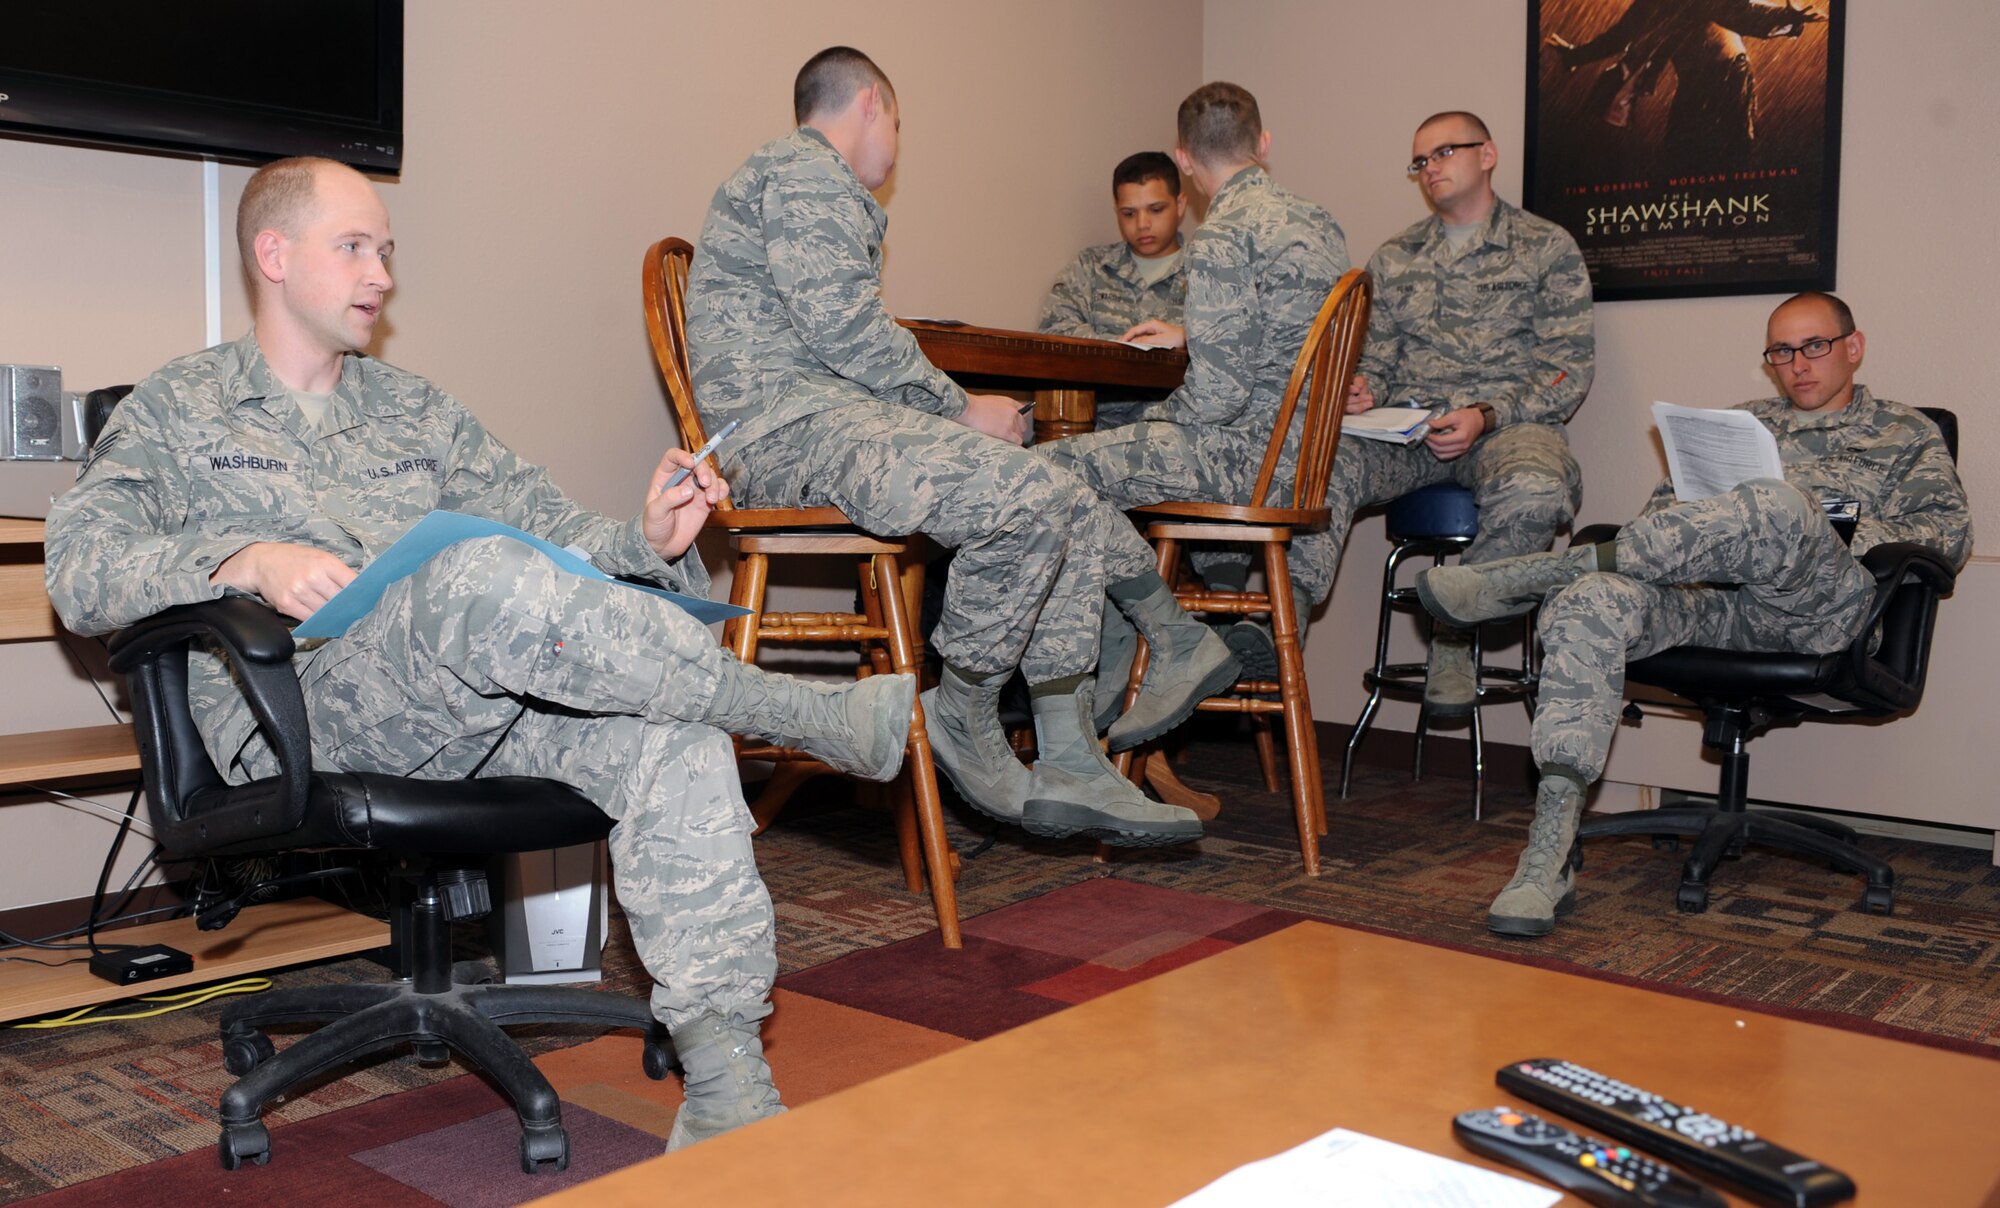 Staff Sgt. Alex Washburn, 28th Civil Engineer Squadron airman dorm leader, gives a dorm in-processing brief to a group of new Airmen at Ellsworth Air Force Base, S.D., April 13, 2016. The ADLs ensure new first term Airmen arriving at Ellsworth receive this brief to understand the rules and policies of living in the dormitories, including restrictions on having guests and the types of authorized pets in the dorms. (U.S. Air Force photo by Airman 1st Class Denise M. Nevins/Released)